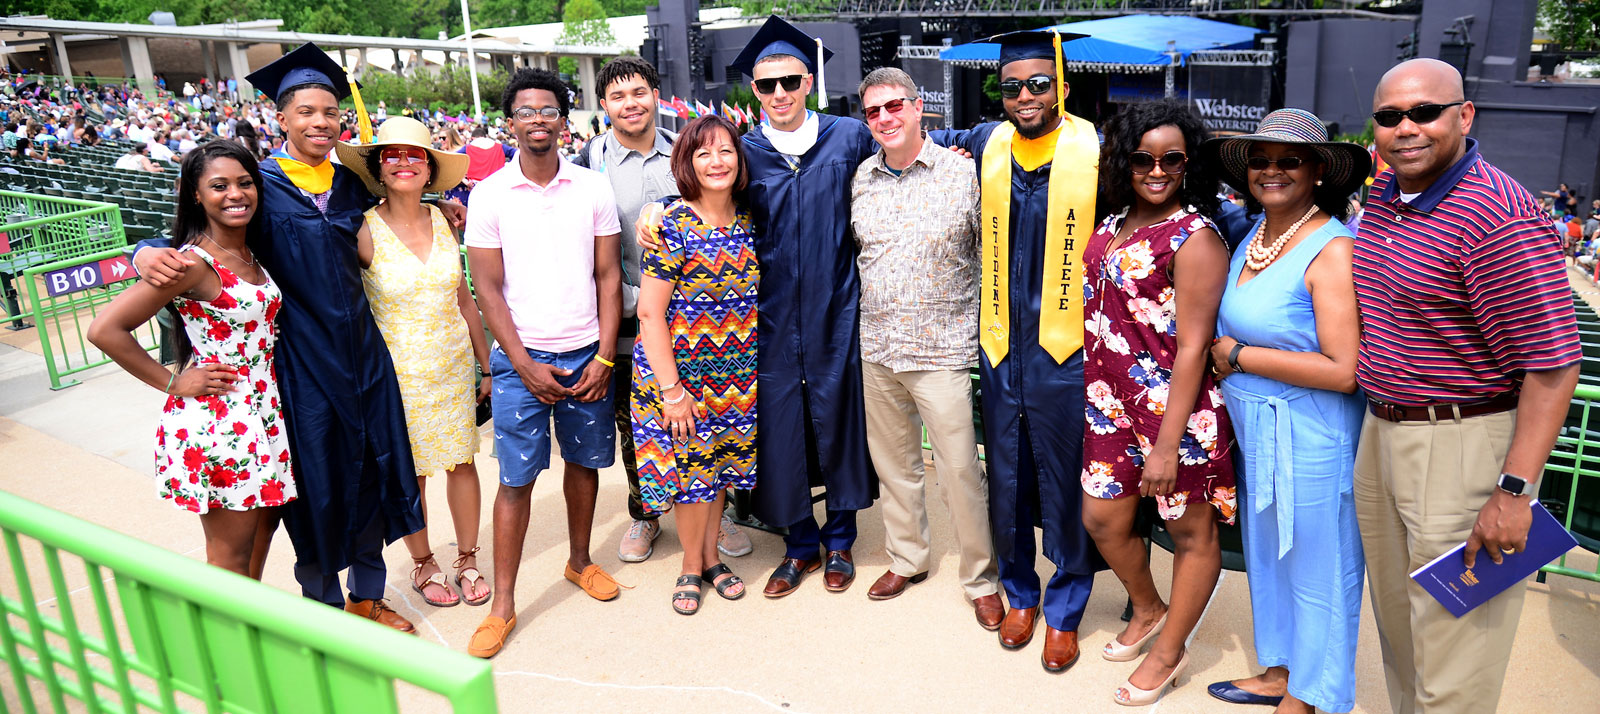 Three graduates pose together with their families at graduation.